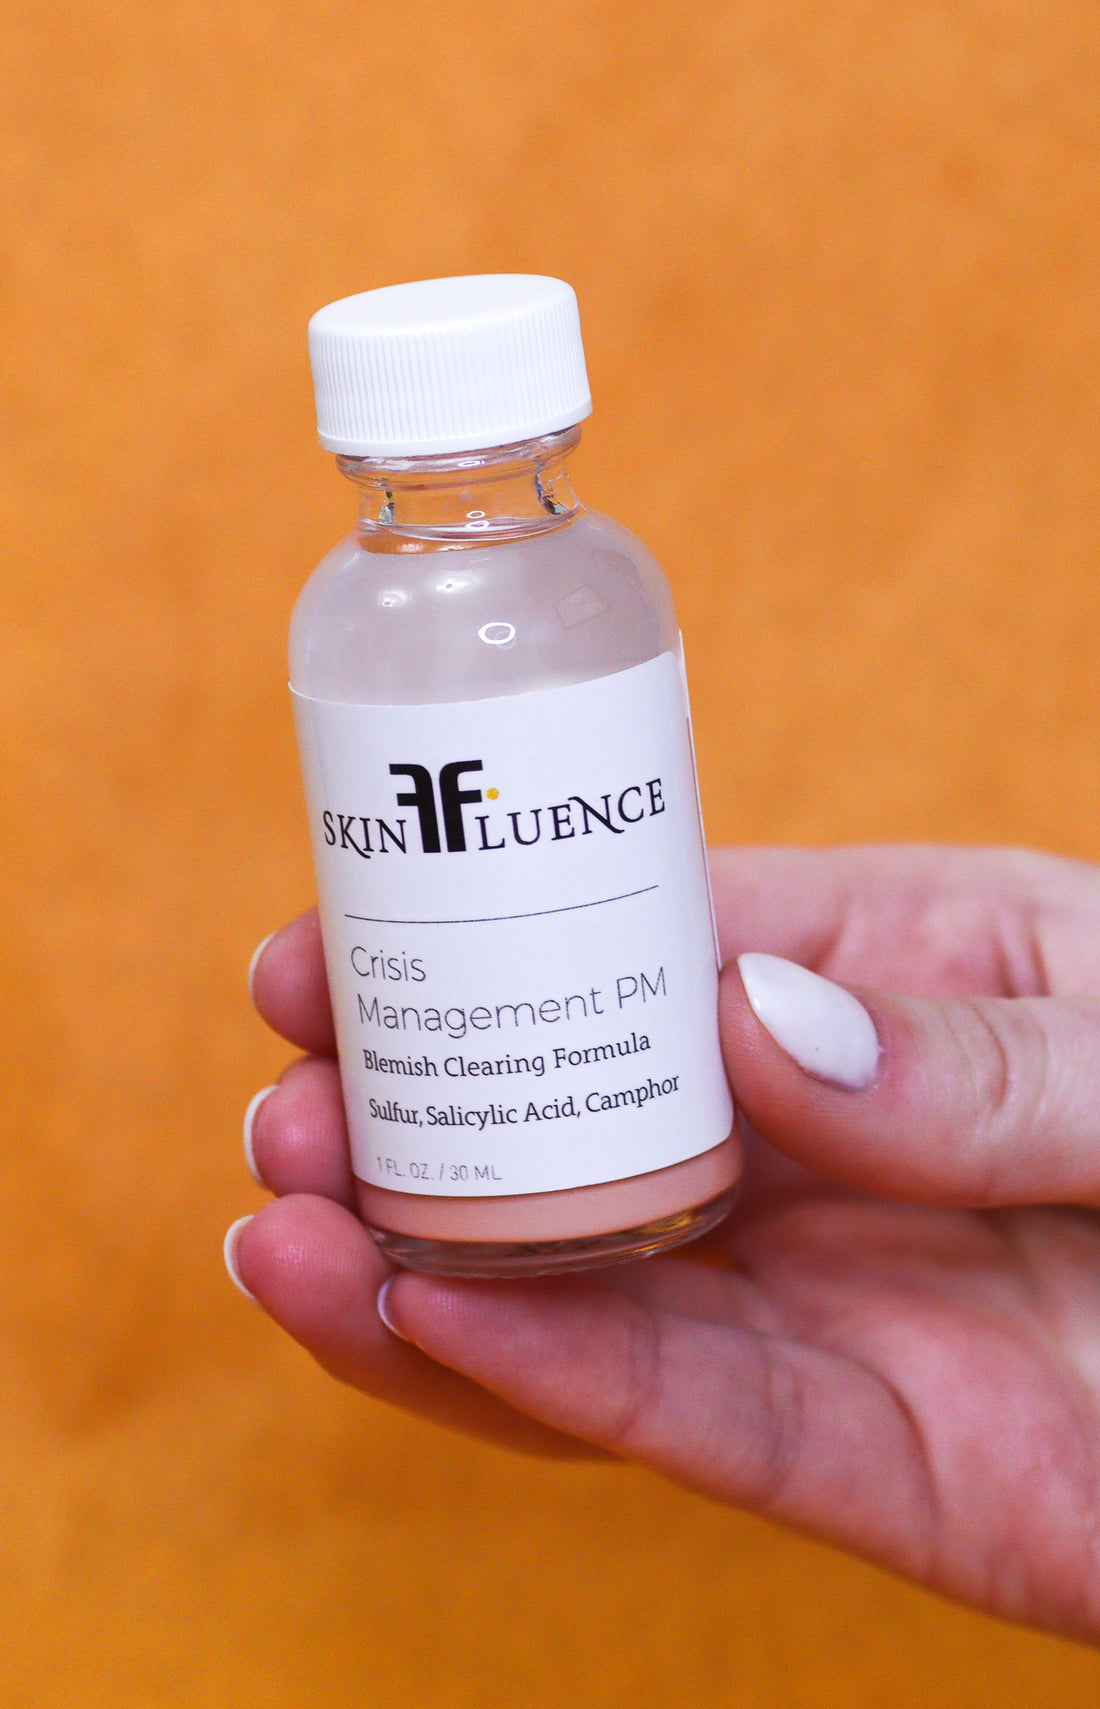 Crisis Management PM acne spot treatment with 10% sulfur, salicylic acid, and camphor